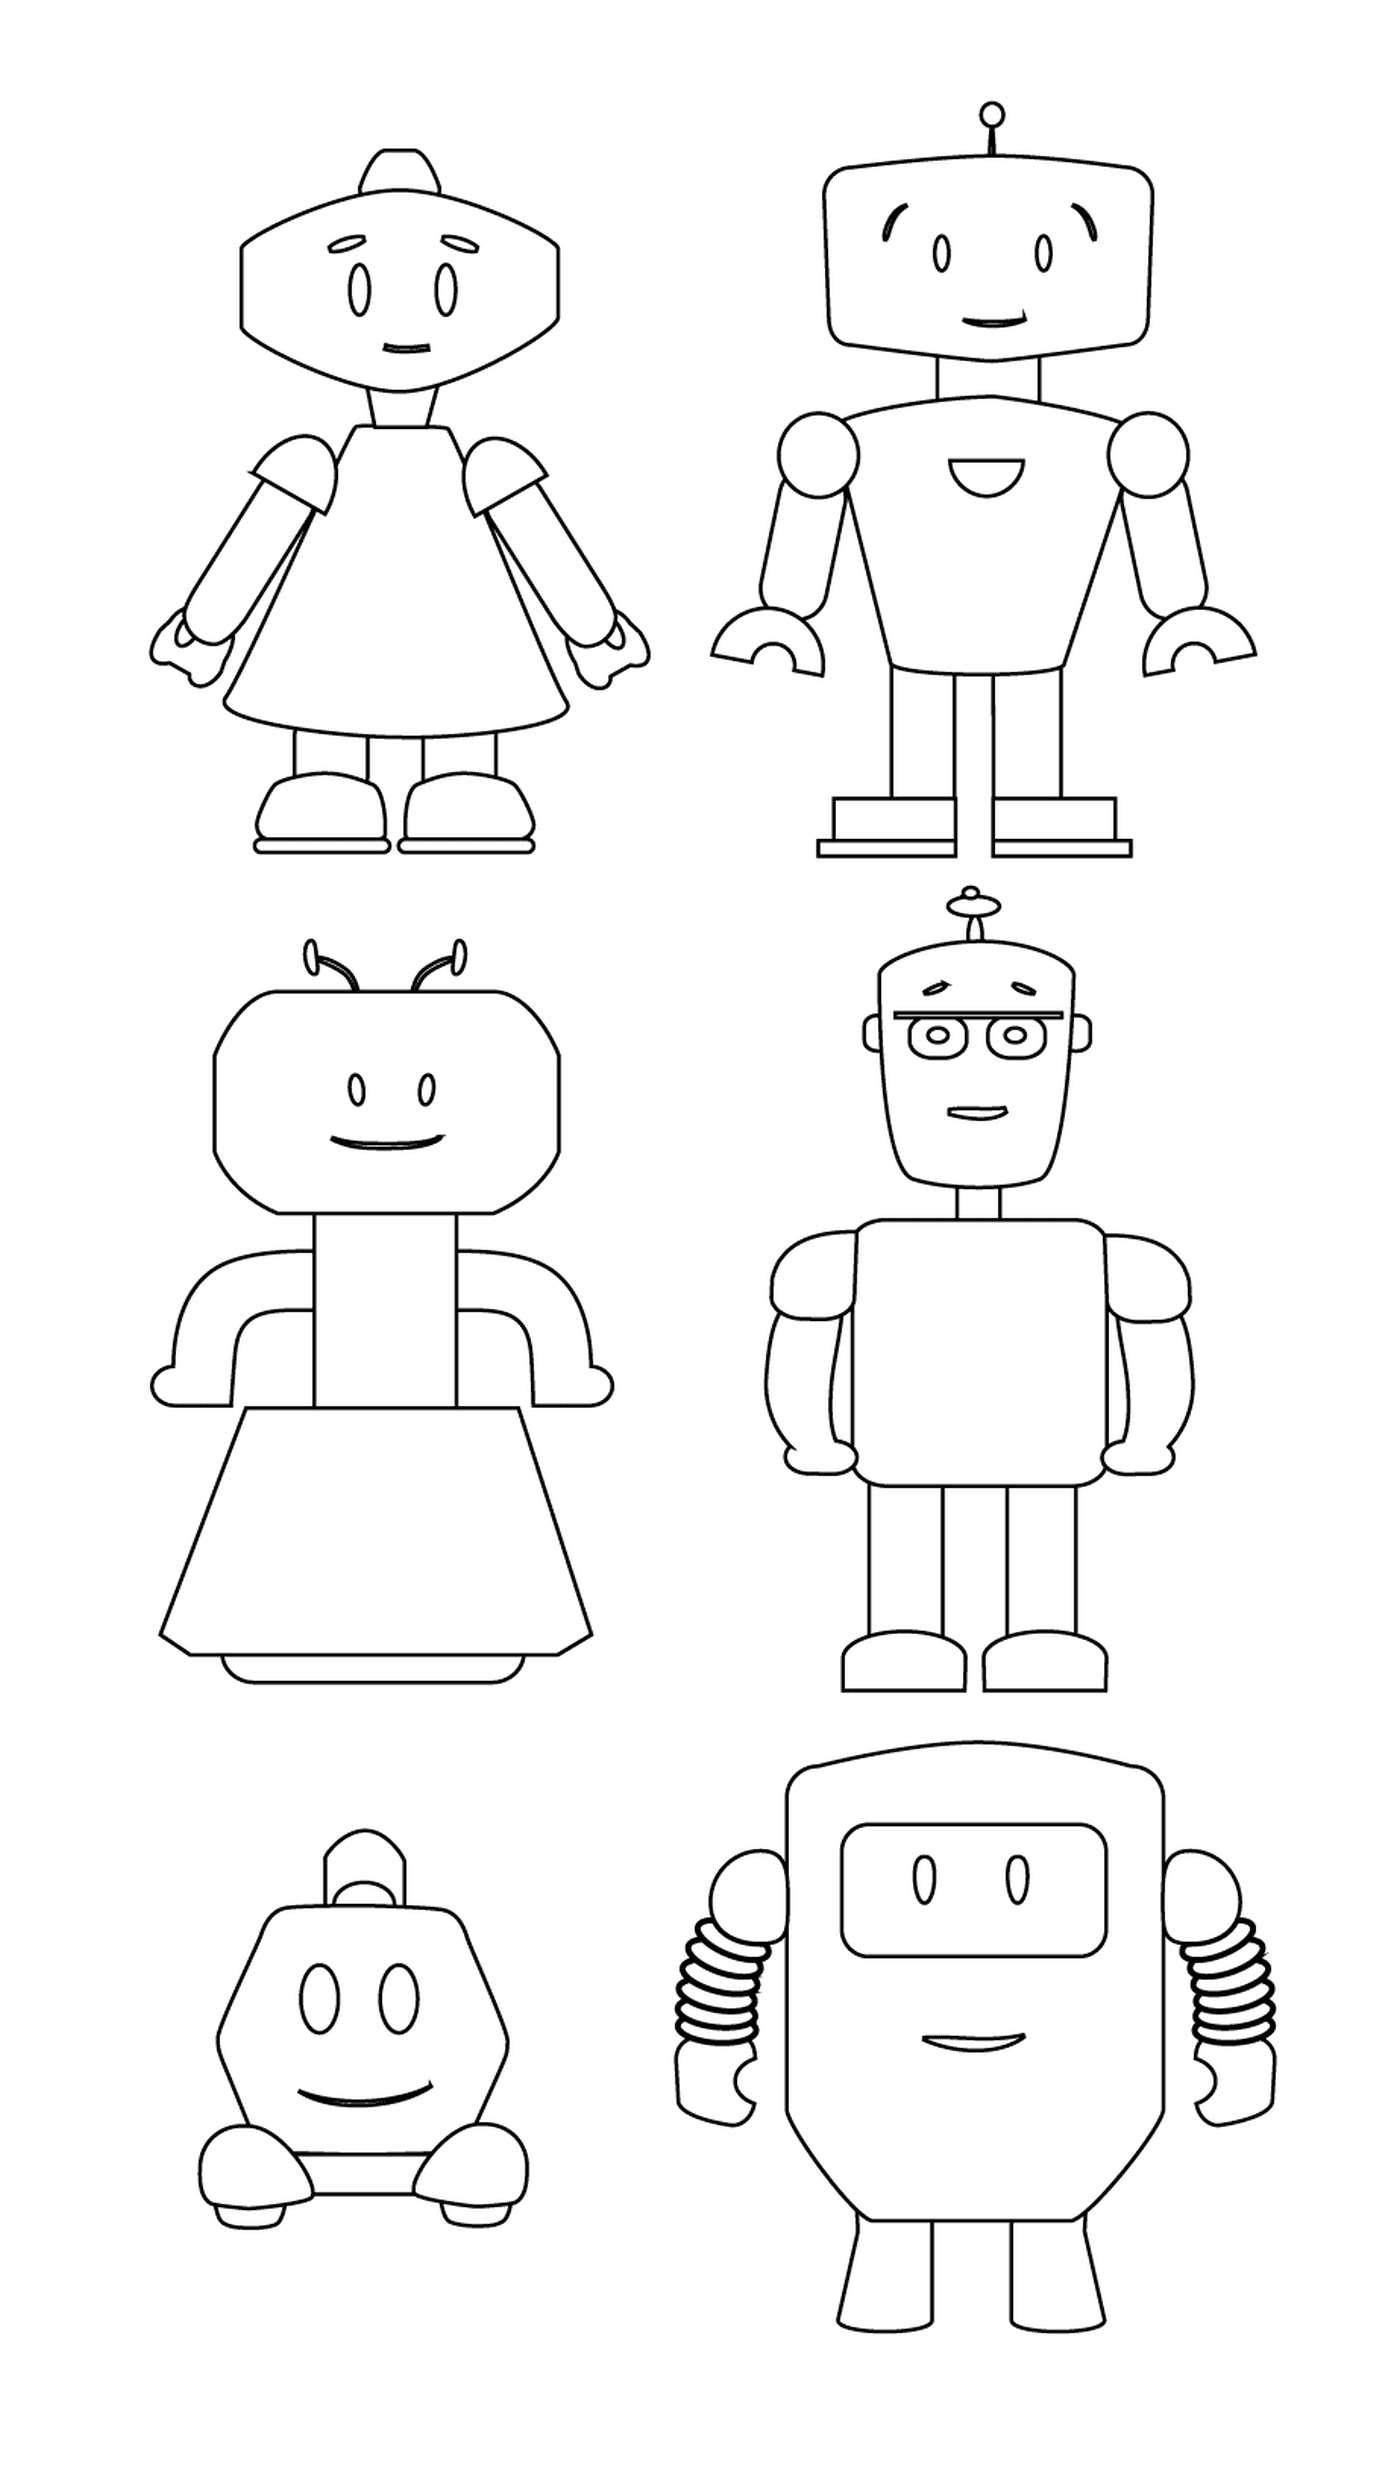  Family of adorable robots 